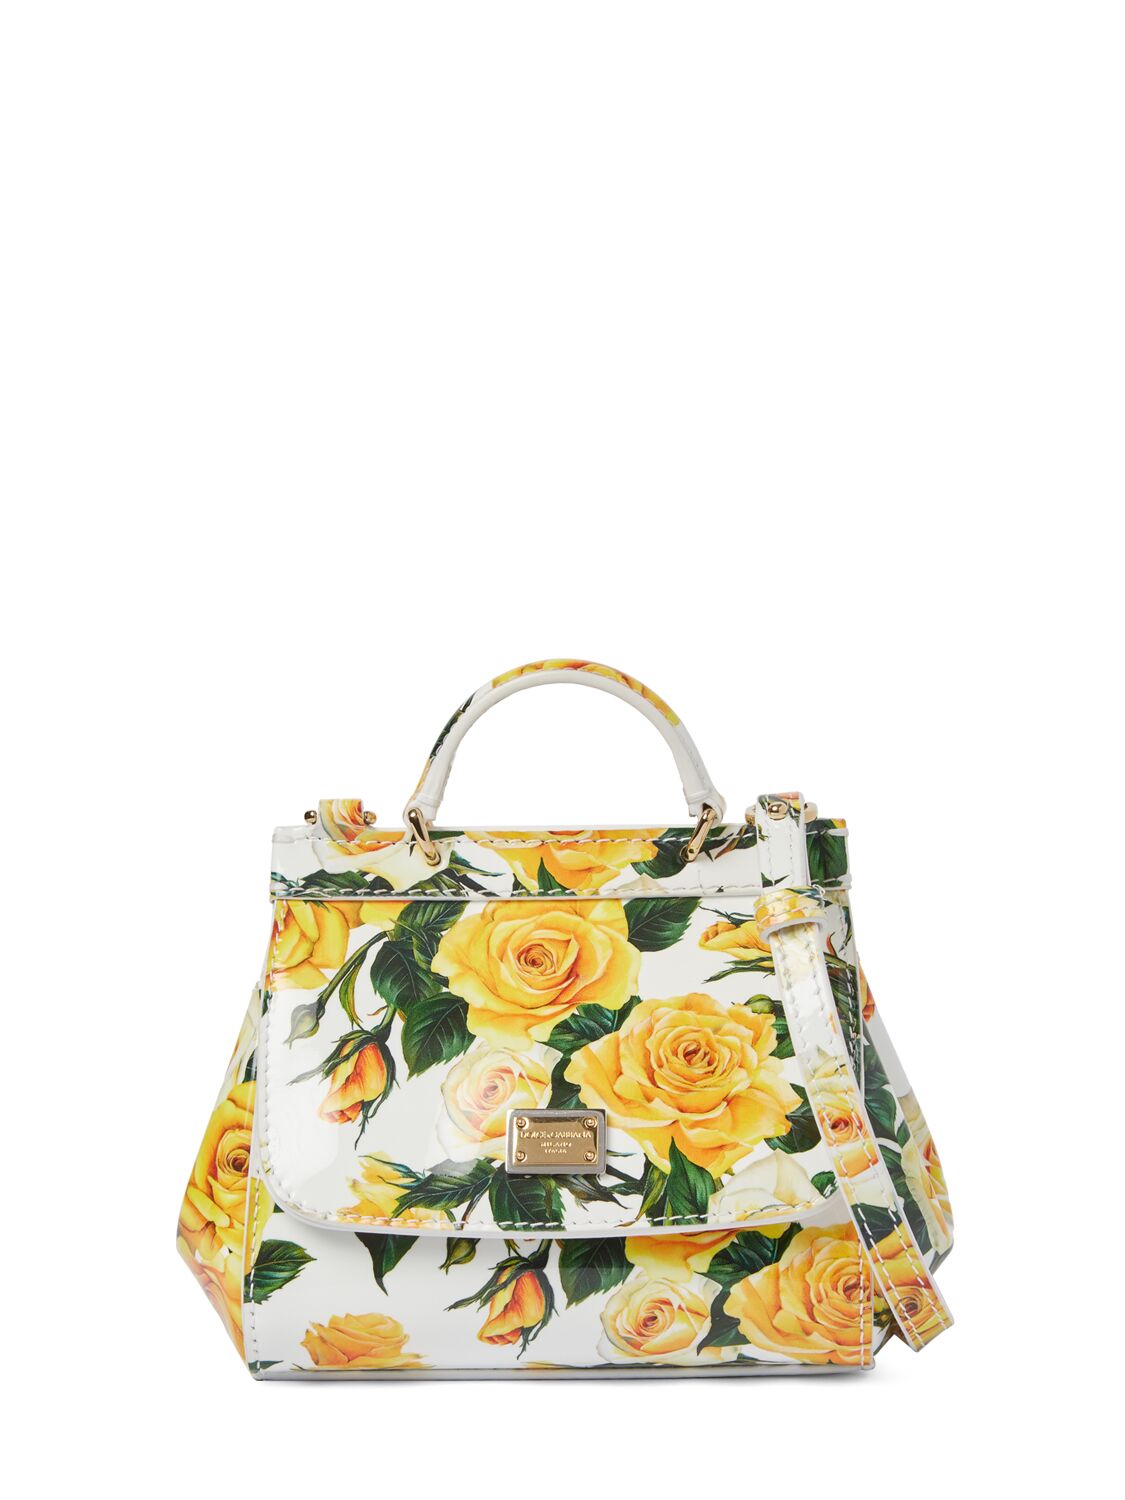 Printed Patent Leather Bag